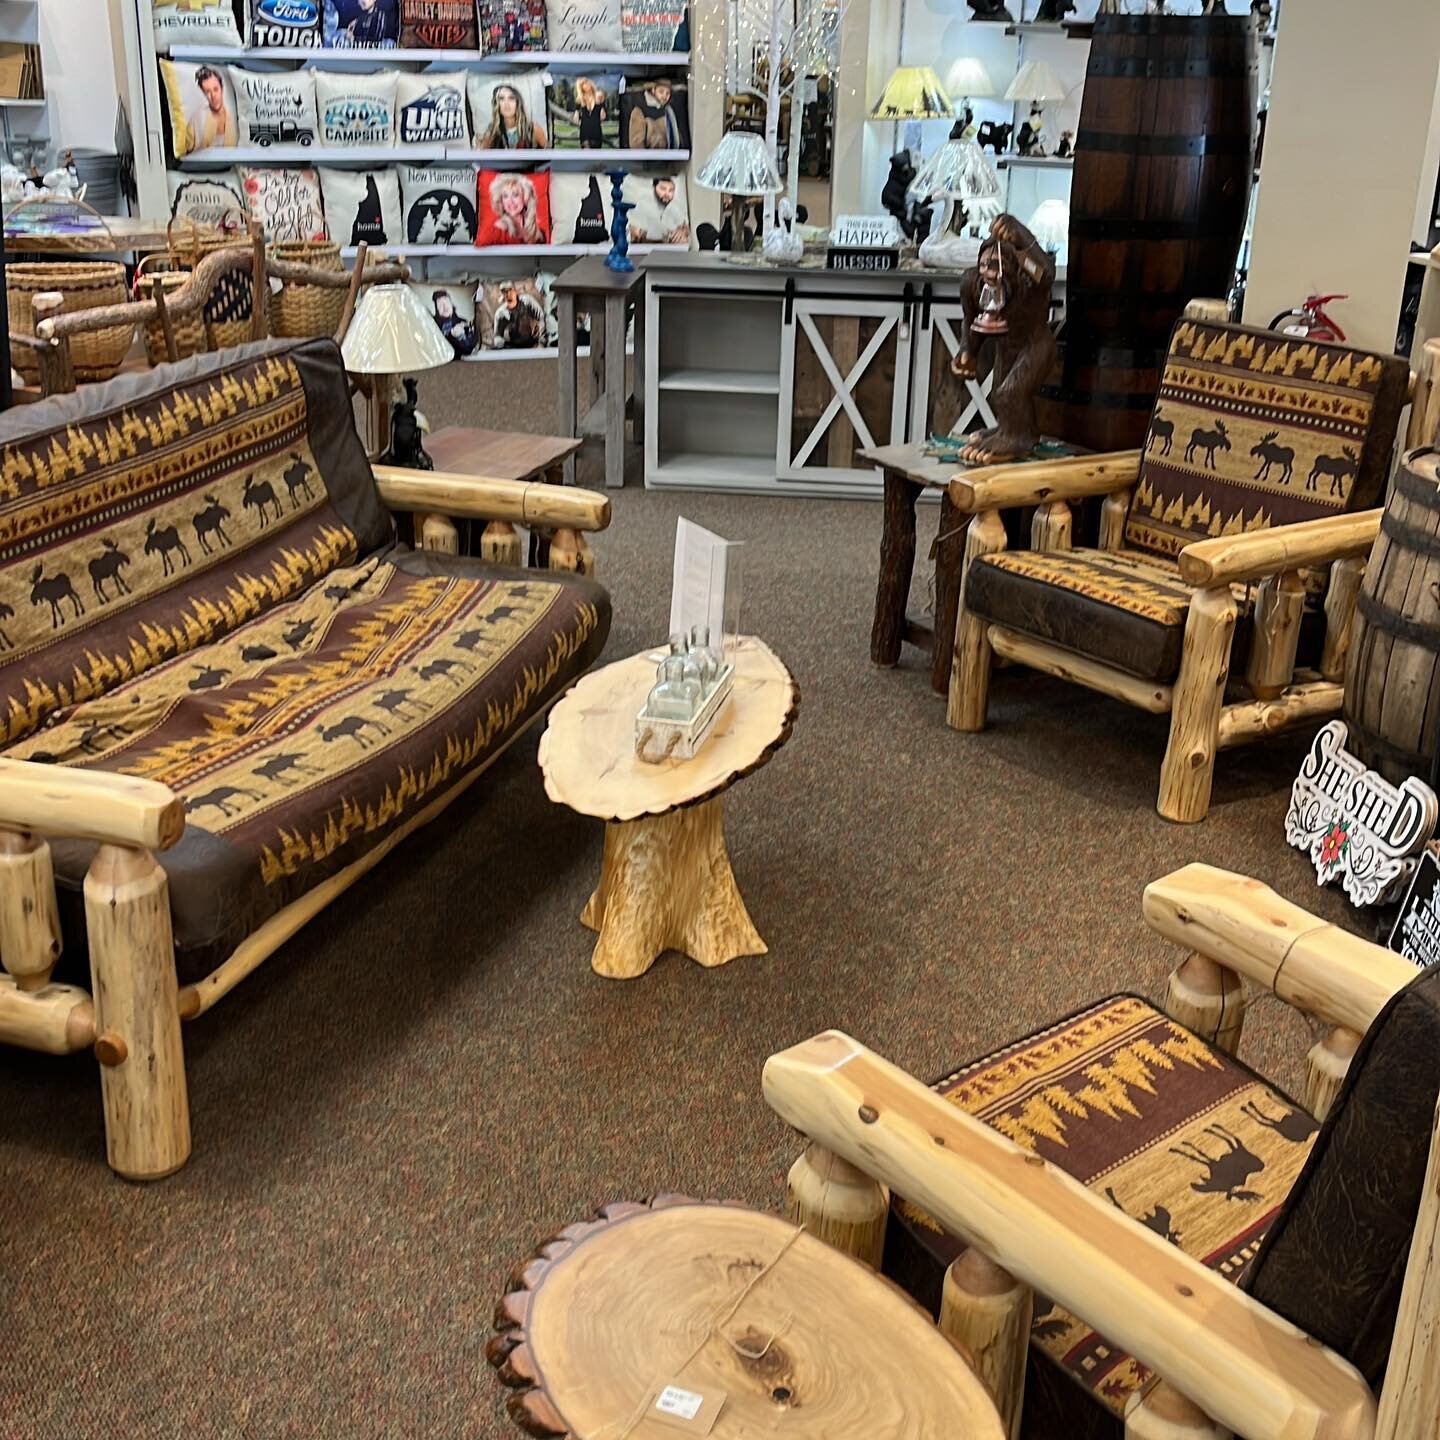 We are open and have power and heat!  Feel free to stop in and warm up and enjoy our comfortable furniture!! Plenty of room for good company and conversation.  Find us at The Country Store - NH in Tanger Outlets, Tilton 
#power #outage #poweroutage #